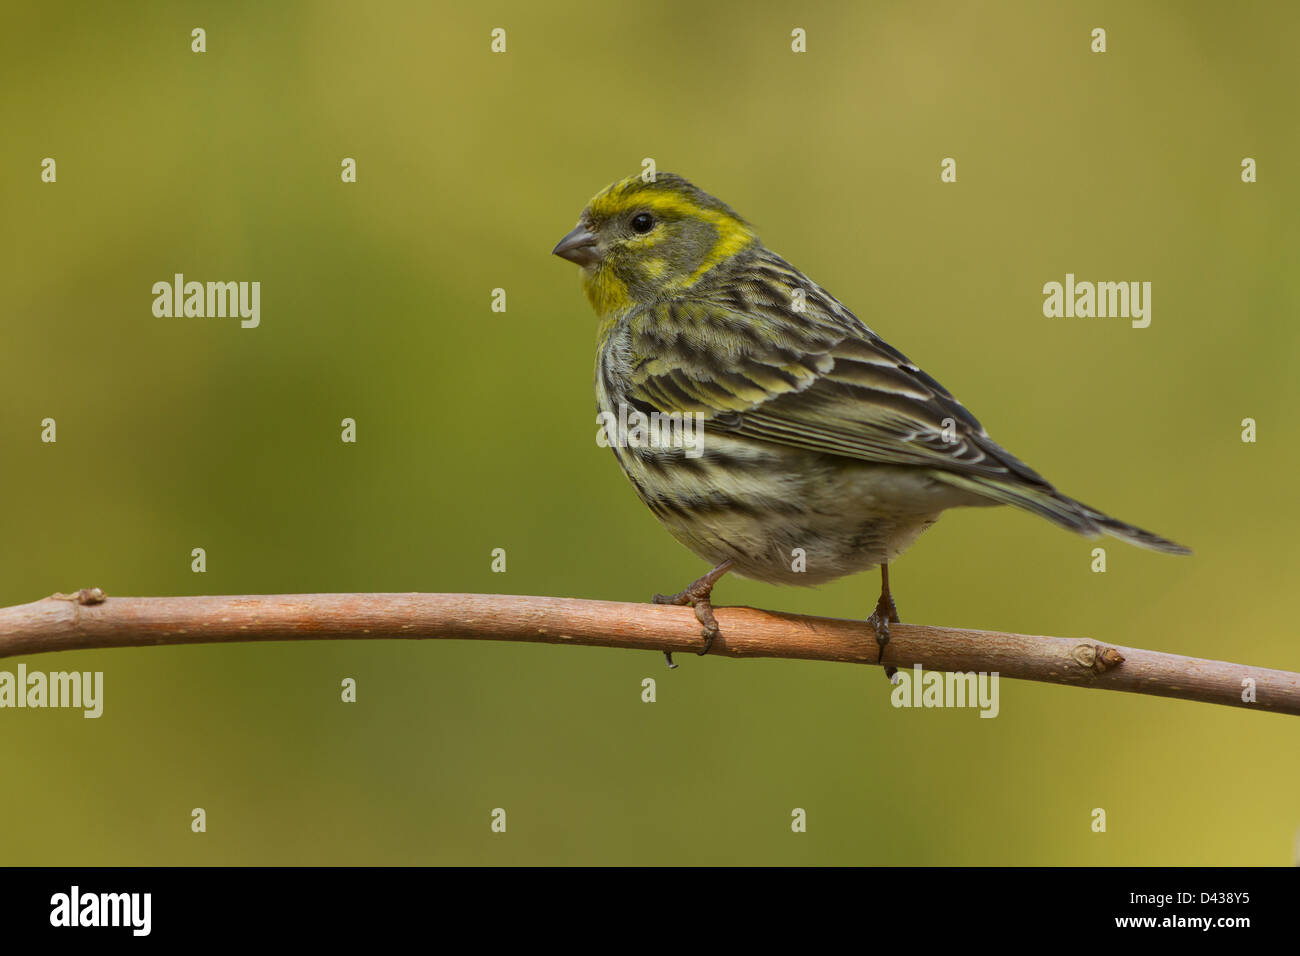 European serin on a branch with green background Stock Photo